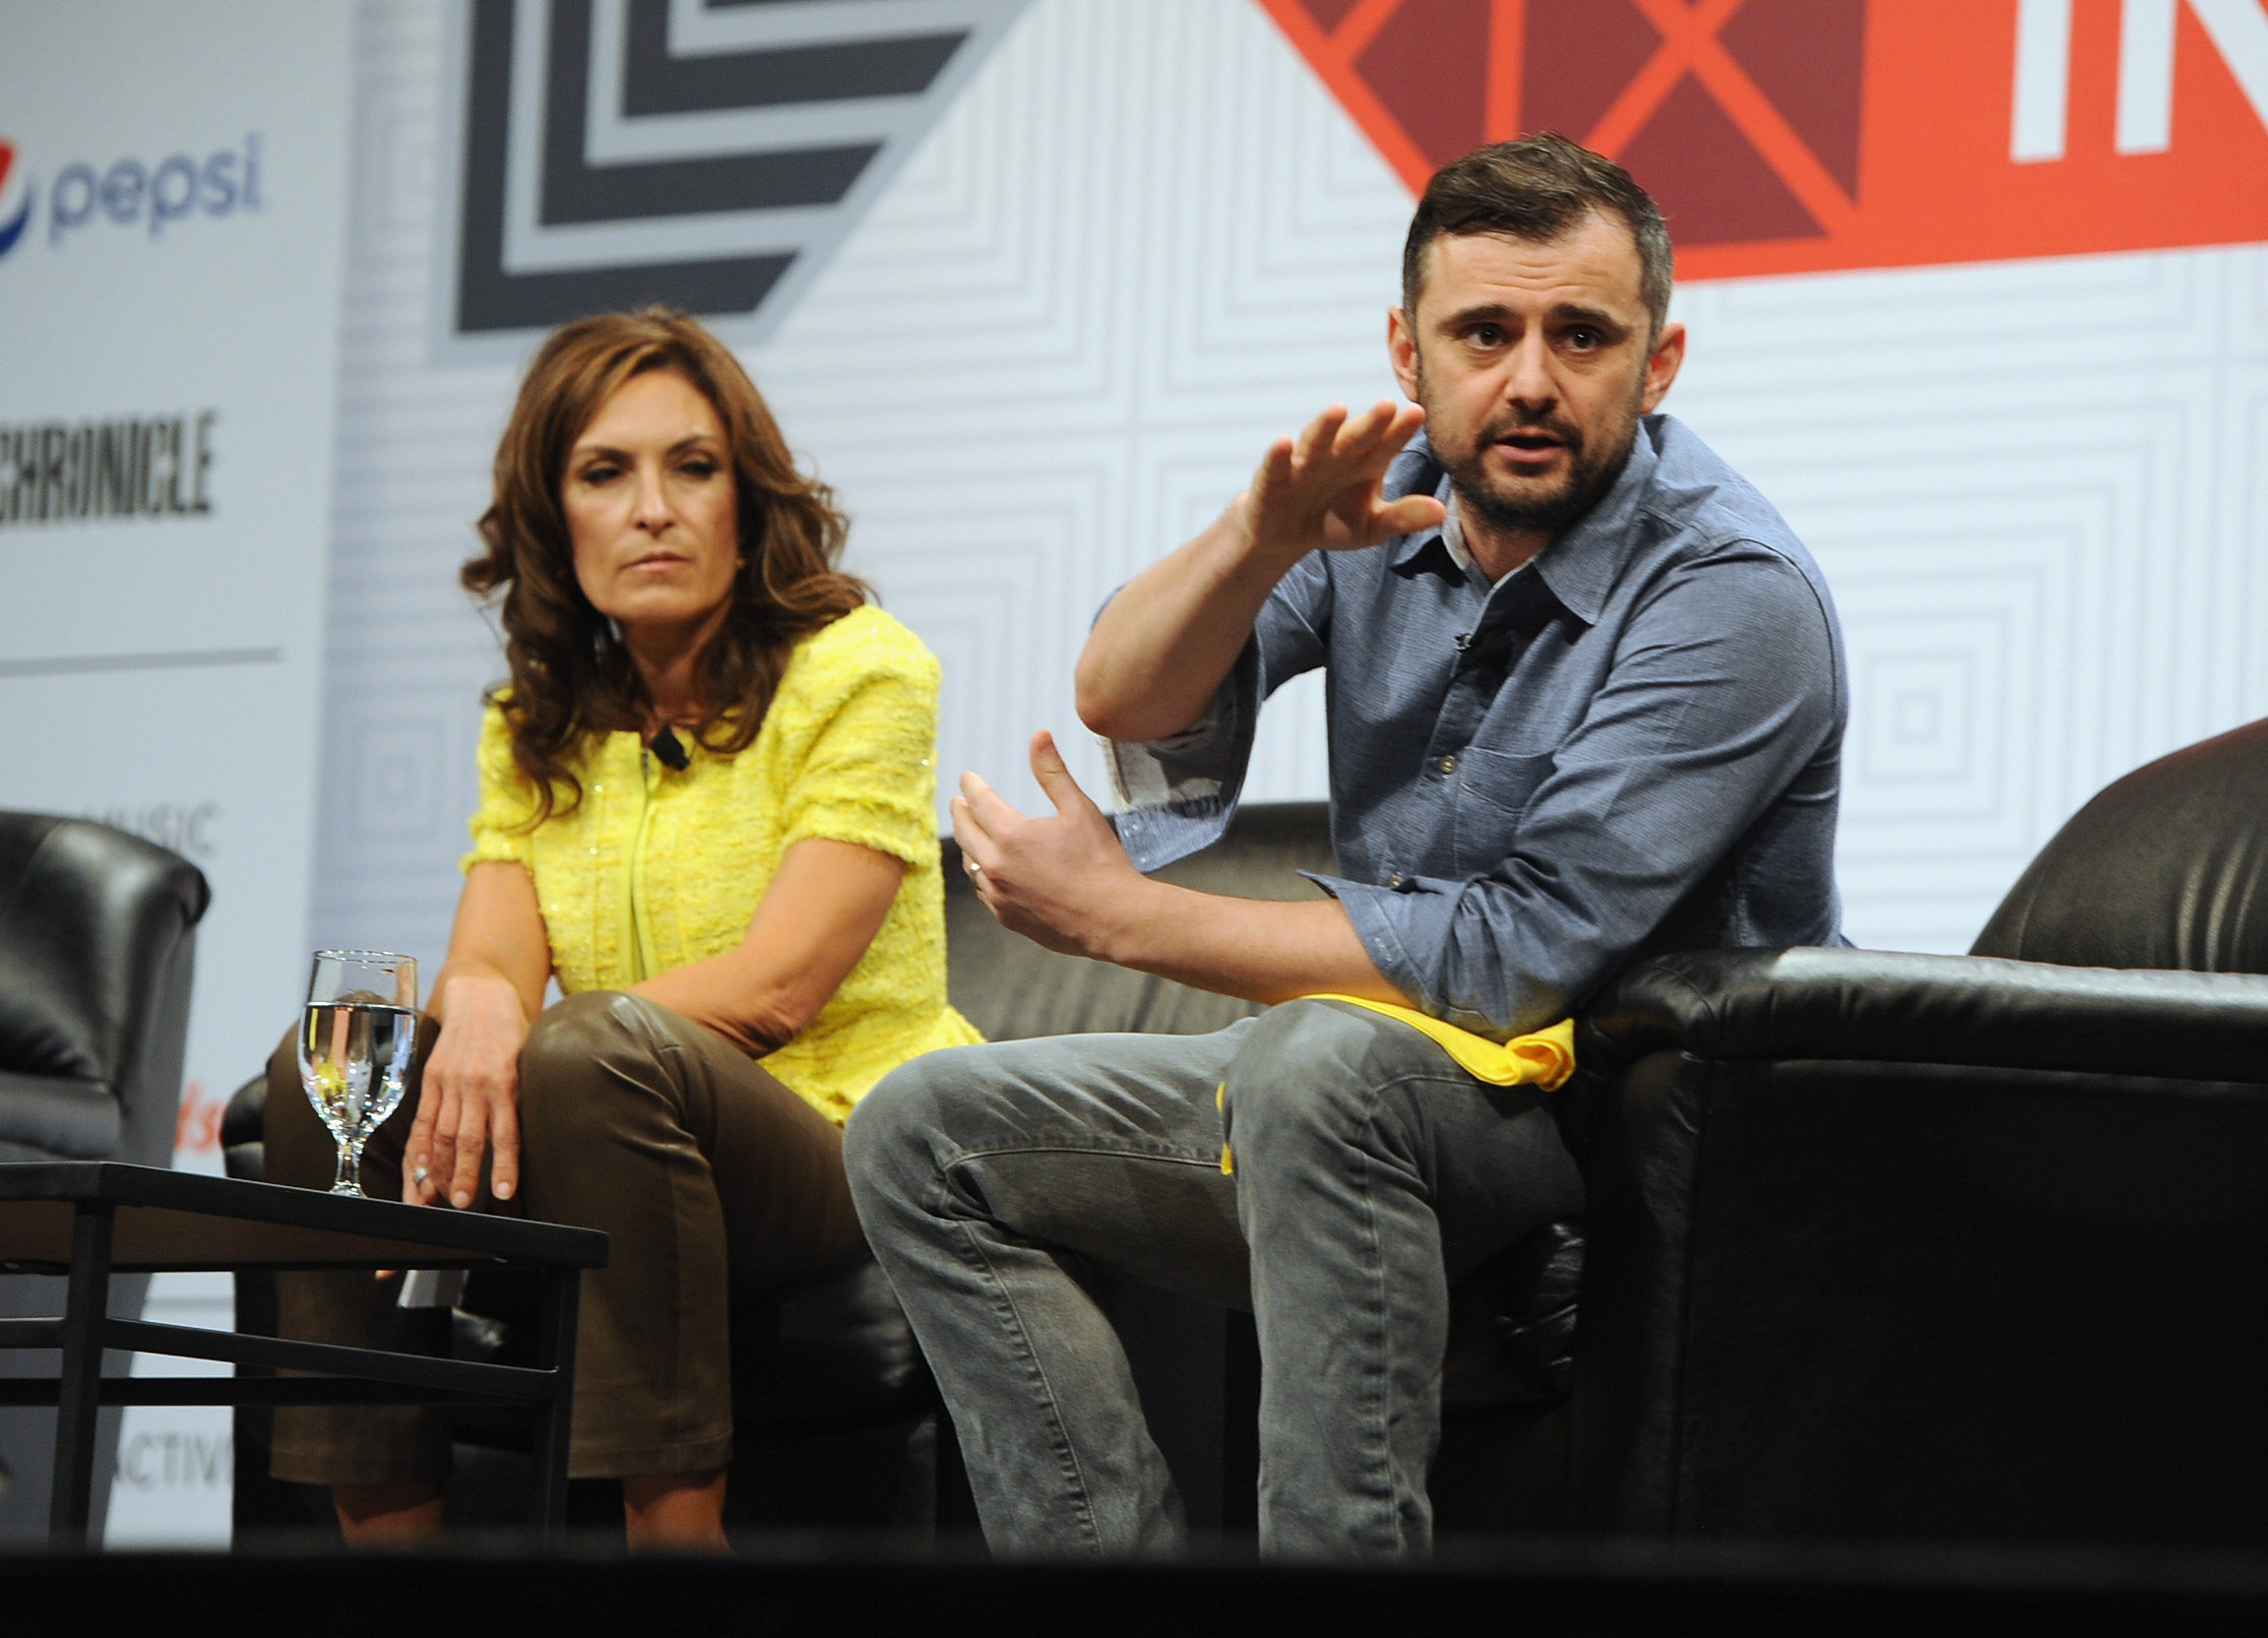 Gary Vaynerchuk, CEO of VaynerMedia, speaks onstage at 'What It Really Takes To Win In Business' during the 2015 SXSW Music, Film + Interactive Festival at the Austin Convention Center on March 14, 2015 in Austin, Texas. (Jessica Alexander—Getty Images)